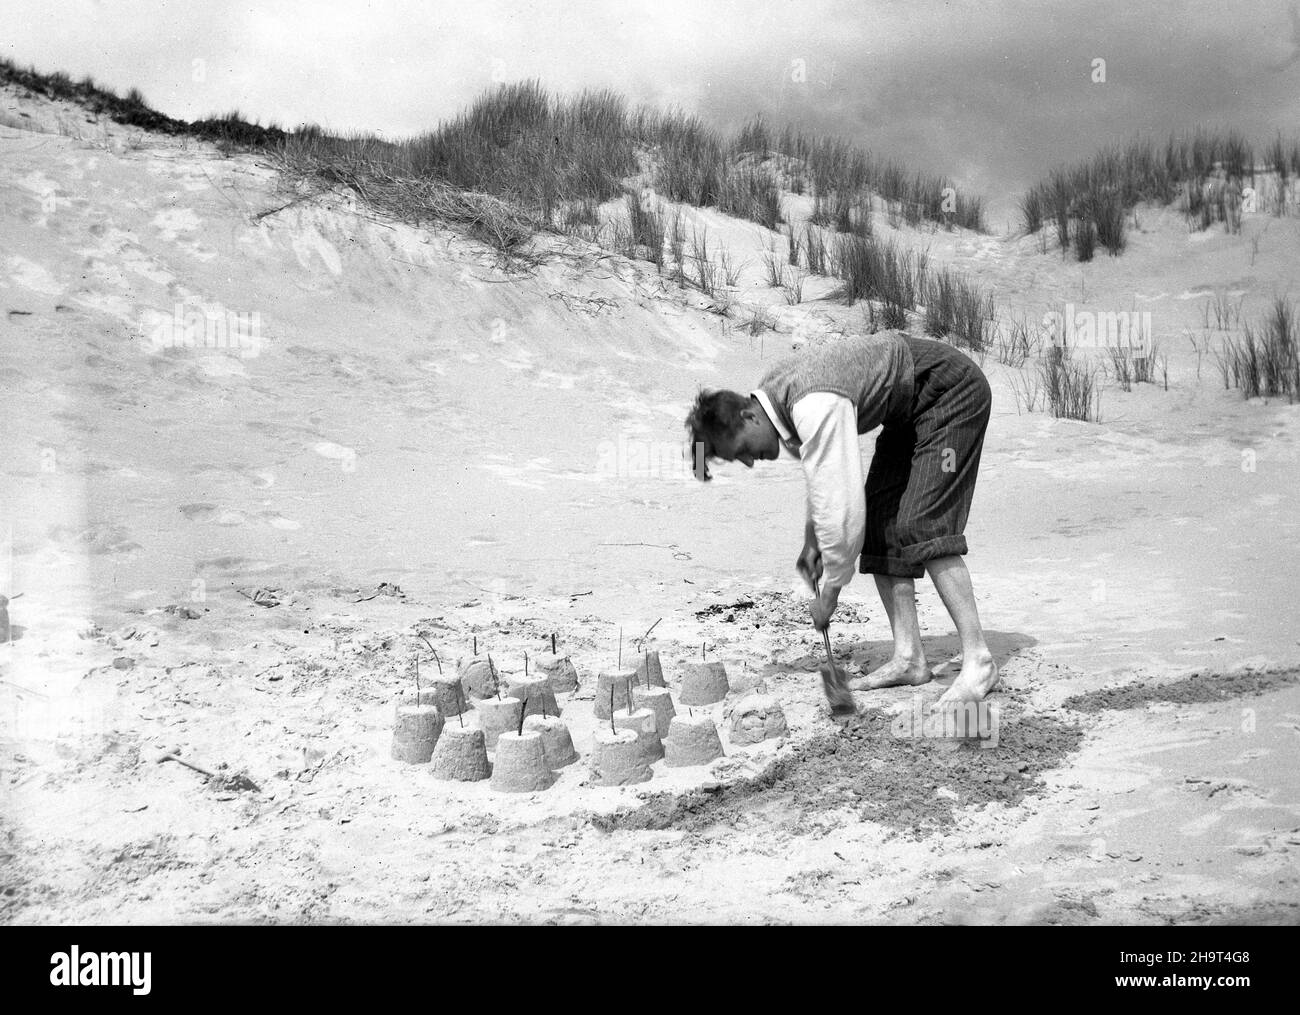 1950s, historical, outside on a sandy beach, by some sand dunes, a man with his pin stripe suit trousers rolled up to his knees and a sleeveless sweater over his shirt, ending down with a small child's spade, building sandcastles, all with little sticks placed on the top of them, England, UK. Stock Photo